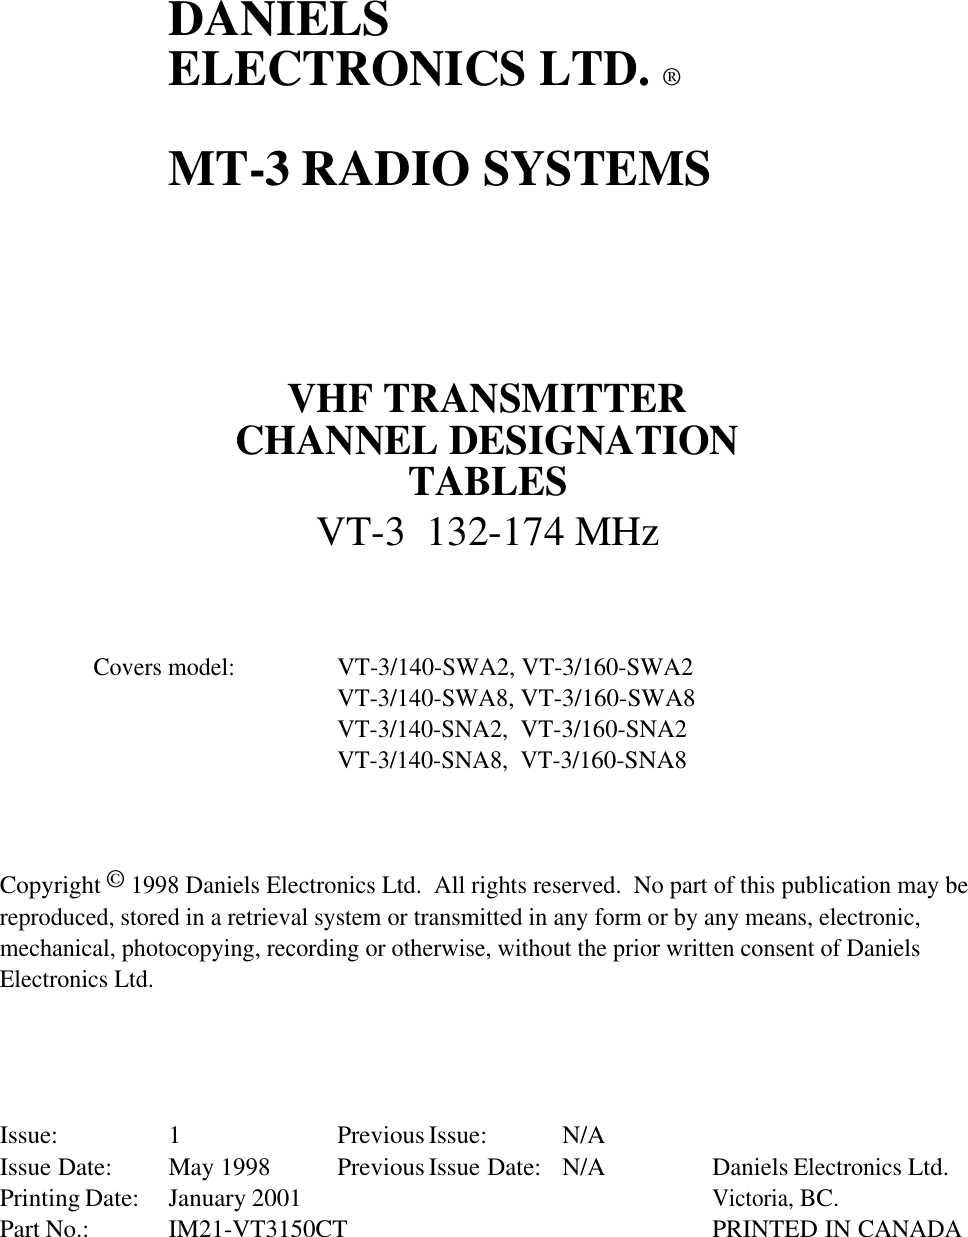 DANIELSELECTRONICS LTD. ®MT-3 RADIO SYSTEMSVHF TRANSMITTERCHANNEL DESIGNATIONTABLESVT-3  132-174 MHzCovers model:VT-3/140-SWA2, VT-3/160-SWA2VT-3/140-SWA8, VT-3/160-SWA8VT-3/140-SNA2,  VT-3/160-SNA2VT-3/140-SNA8,  VT-3/160-SNA8Copyright © 1998 Daniels Electronics Ltd.  All rights reserved.  No part of this publication may bereproduced, stored in a retrieval system or transmitted in any form or by any means, electronic,mechanical, photocopying, recording or otherwise, without the prior written consent of DanielsElectronics Ltd.Issue: 1 Previous Issue:  N/AIssue Date: May 1998 Previous Issue Date: N/A Daniels Electronics Ltd.Printing Date: January 2001Victoria, BC.Part No.: IM21-VT3150CT  PRINTED IN CANADA